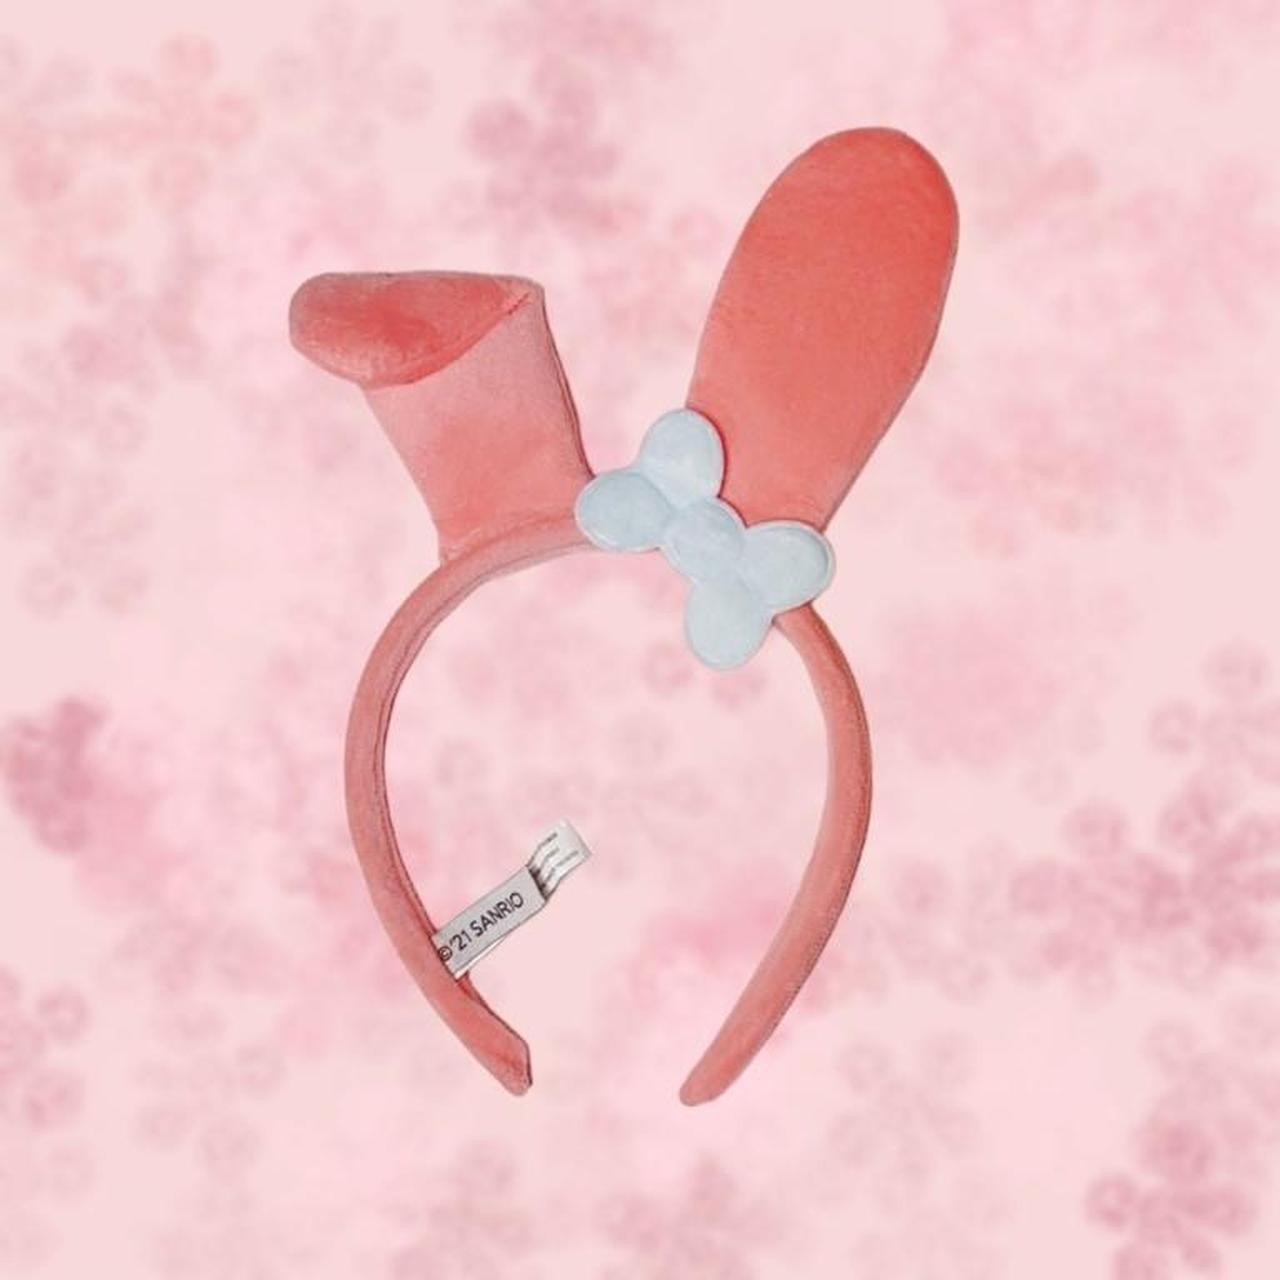 Sanrio Women's Pink and Blue Hair-accessories